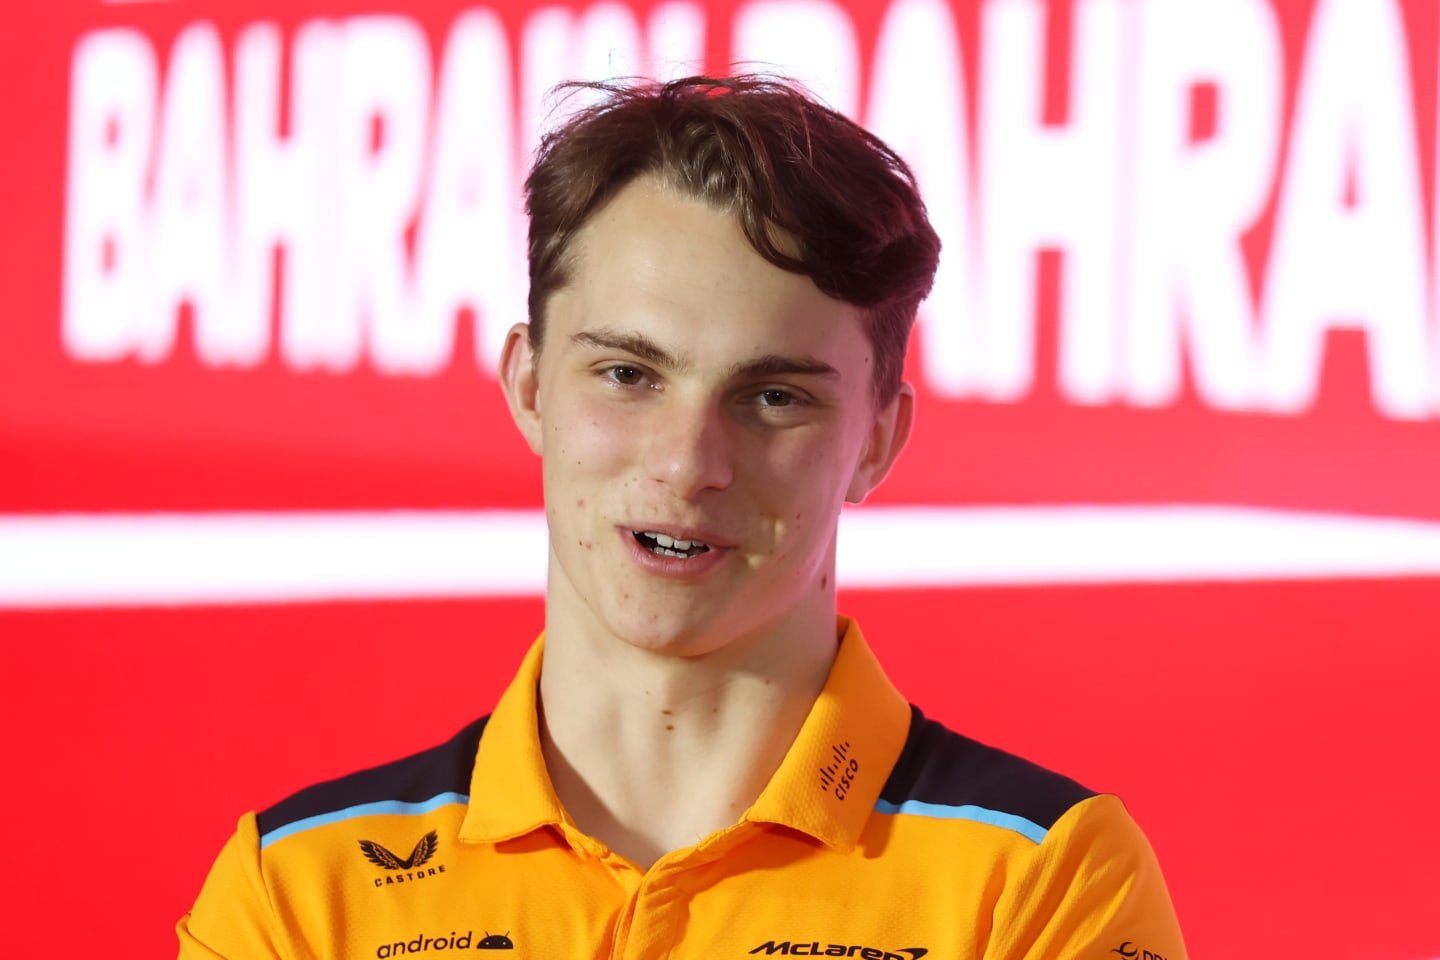 BAHRAIN, BAHRAIN - MARCH 02: Oscar Piastri of Australia and McLaren attends the Drivers Press Conference during previews ahead of the F1 Grand Prix of Bahrain at Bahrain International Circuit on March 02, 2023 in Bahrain, Bahrain. (Photo by Lars Baron/Getty Images)